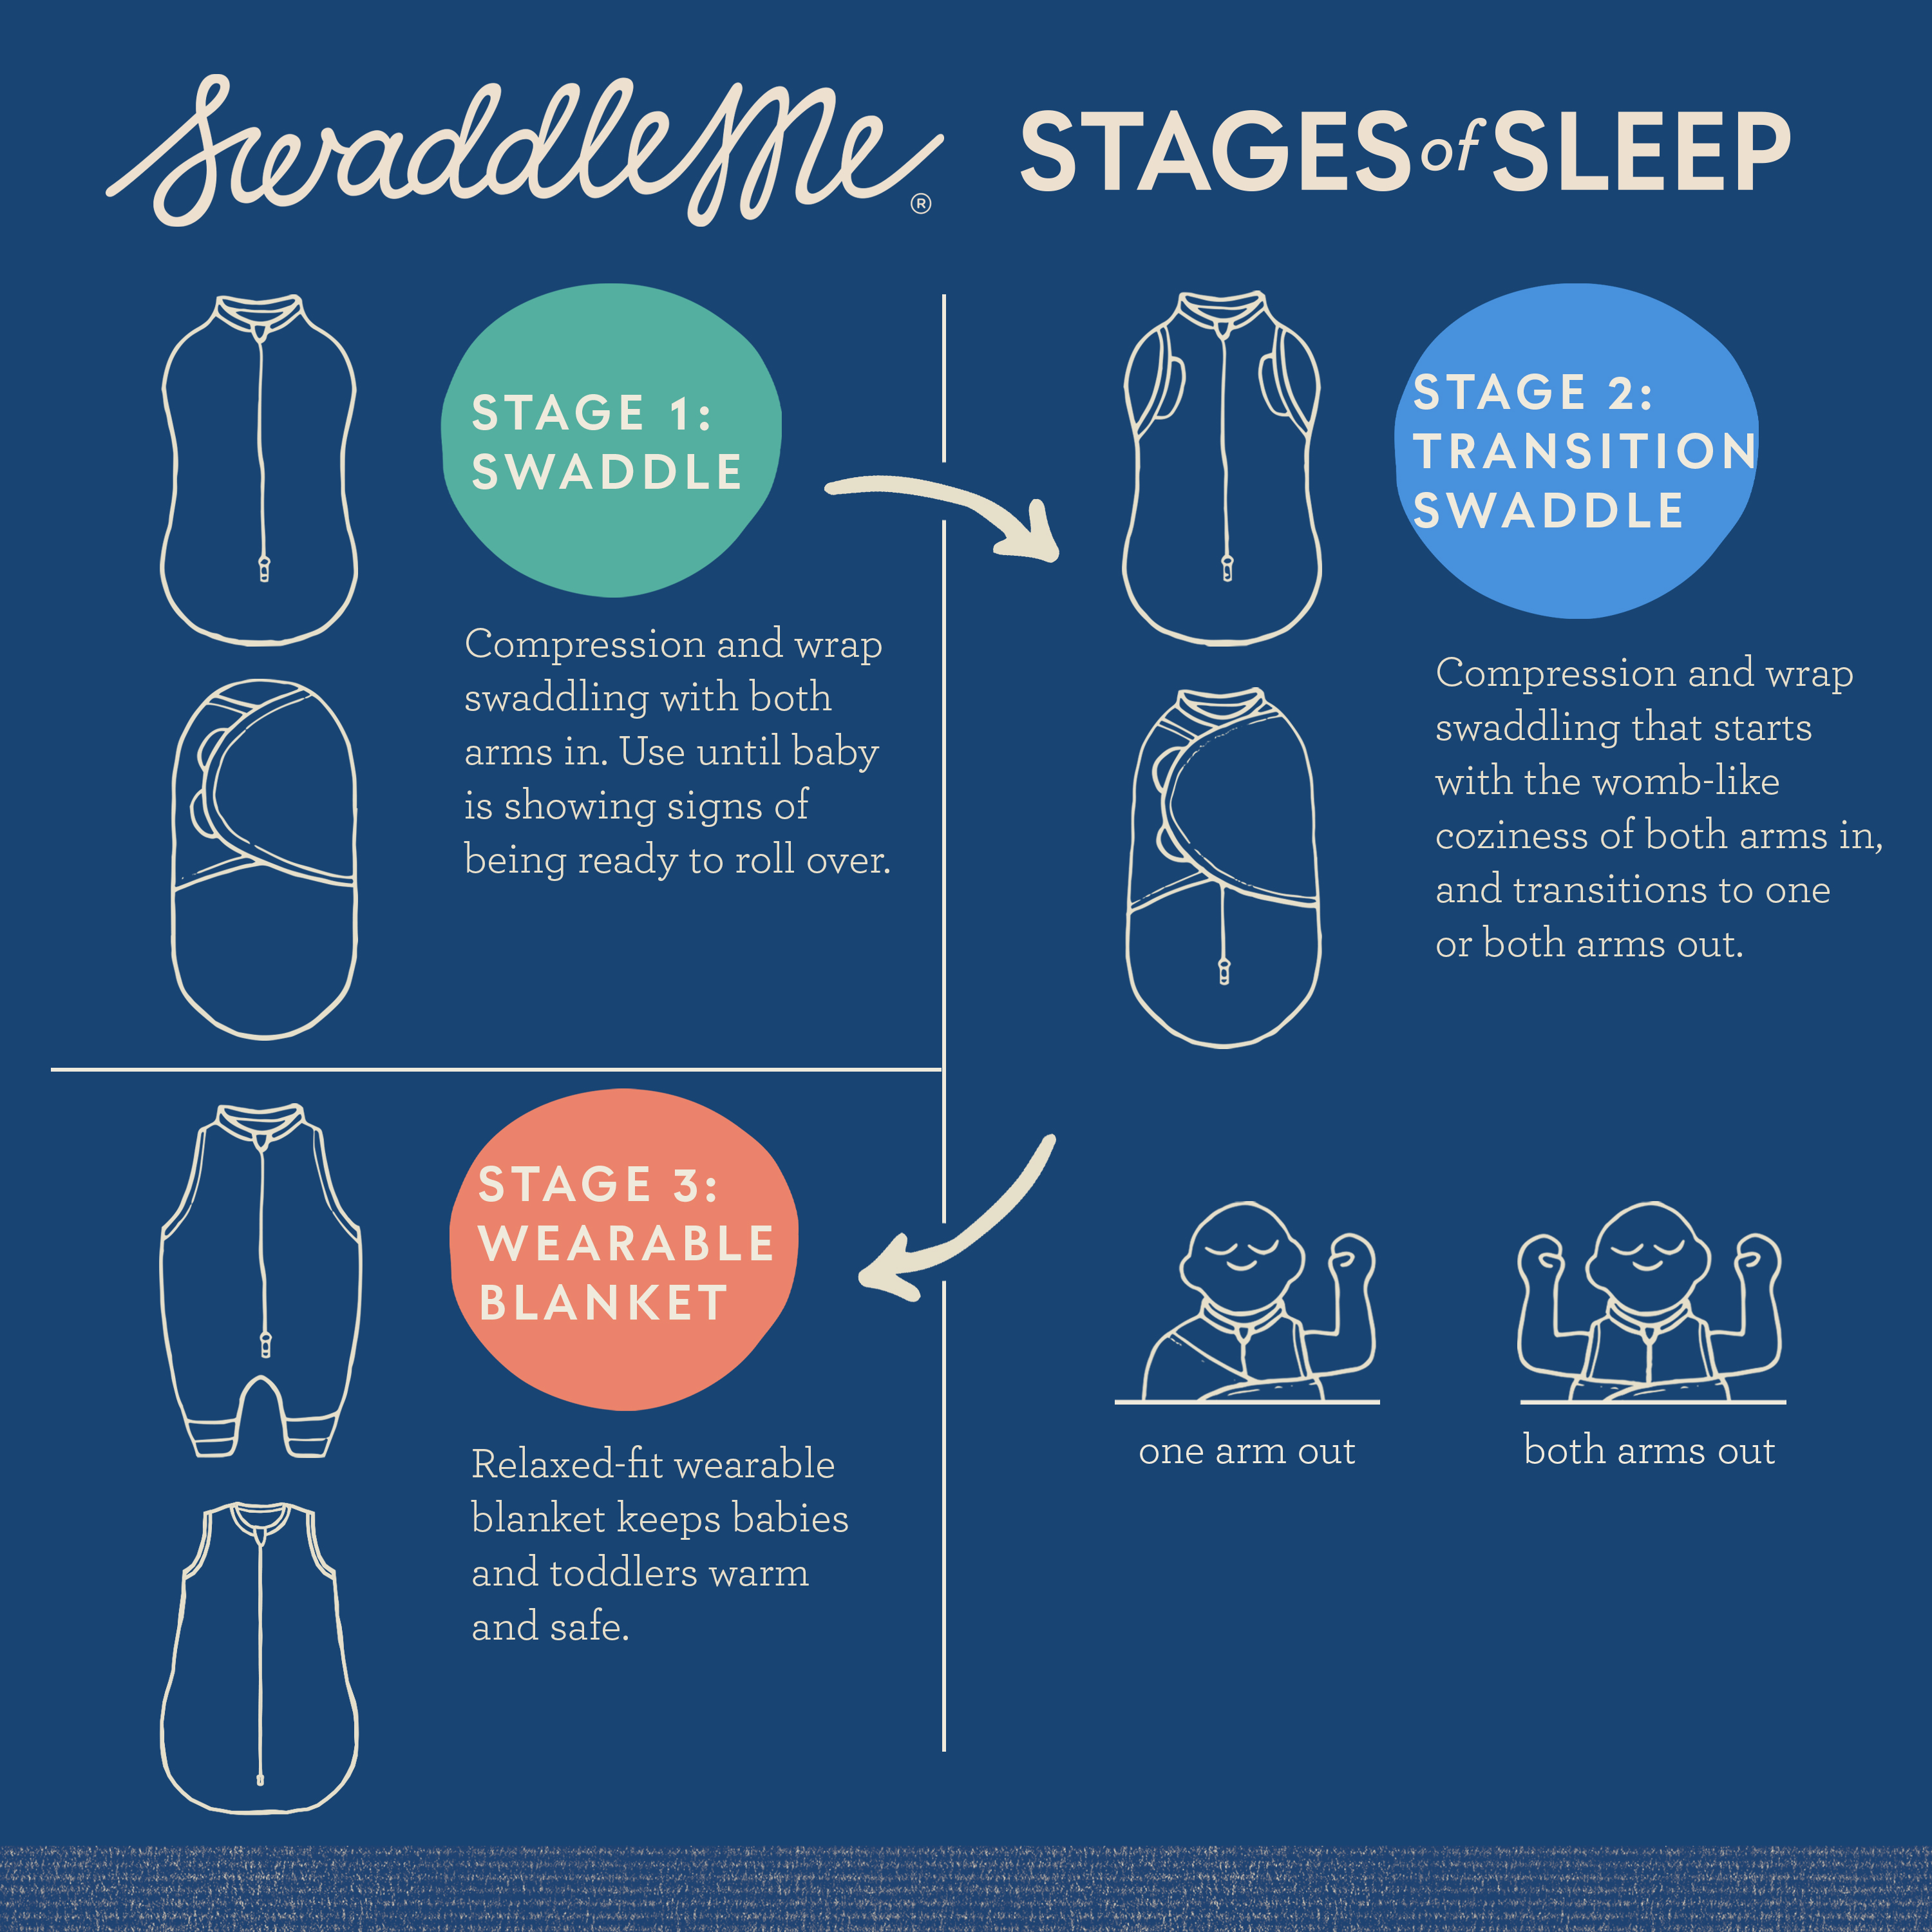 SwaddleMe Original Swaddle – Size Small/Medium, 0-3 Months, 3-Pack (Who Loves You) - image 3 of 4